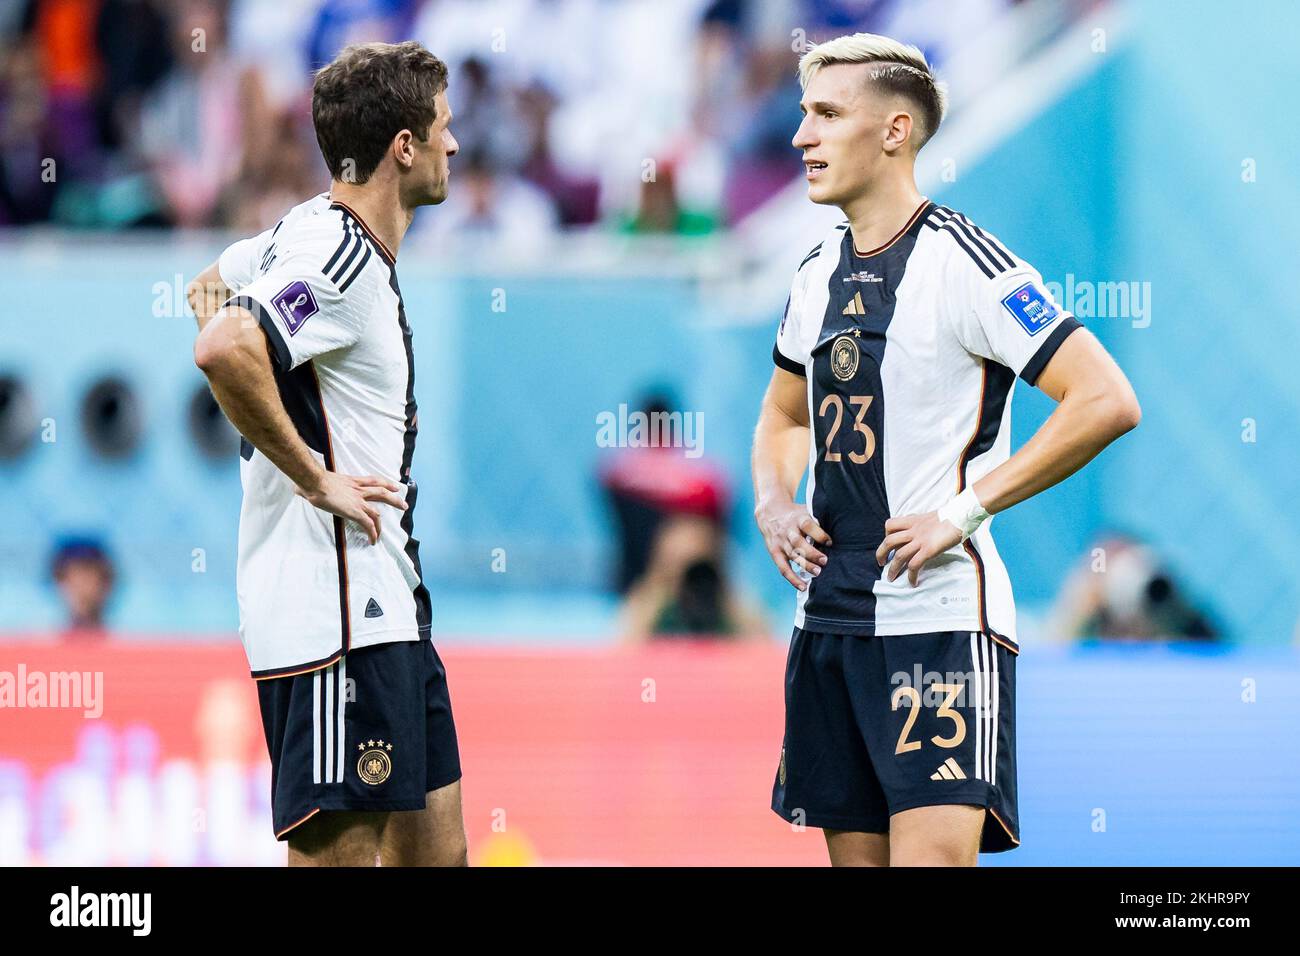 Ar Rayyan, Qatar. 23rd Nov, 2022. Soccer: World Cup, Germany - Japan, preliminary round, Group E, Matchday 1, Chalifa International Stadium, Germany's Thomas Müller (l) and Germany's Nico Schlotterbeck (r) react during the match. Credit: Tom Weller/dpa/Alamy Live News Stock Photo